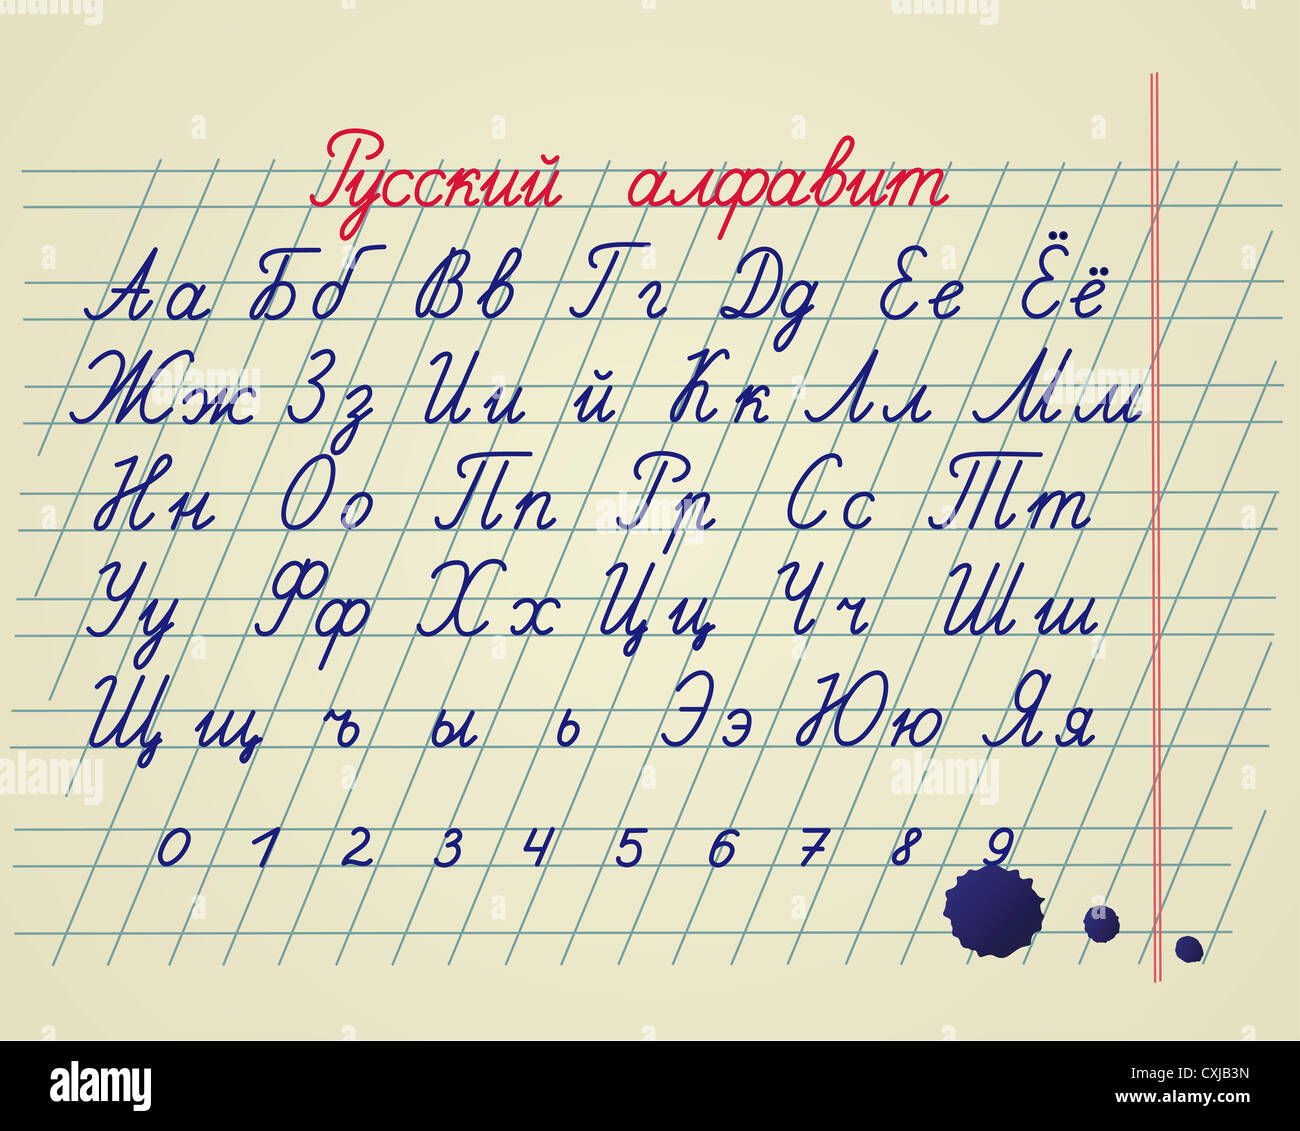 Russian alphabet. Hand drawing russian letters and numbers on school notebook Stock Photo